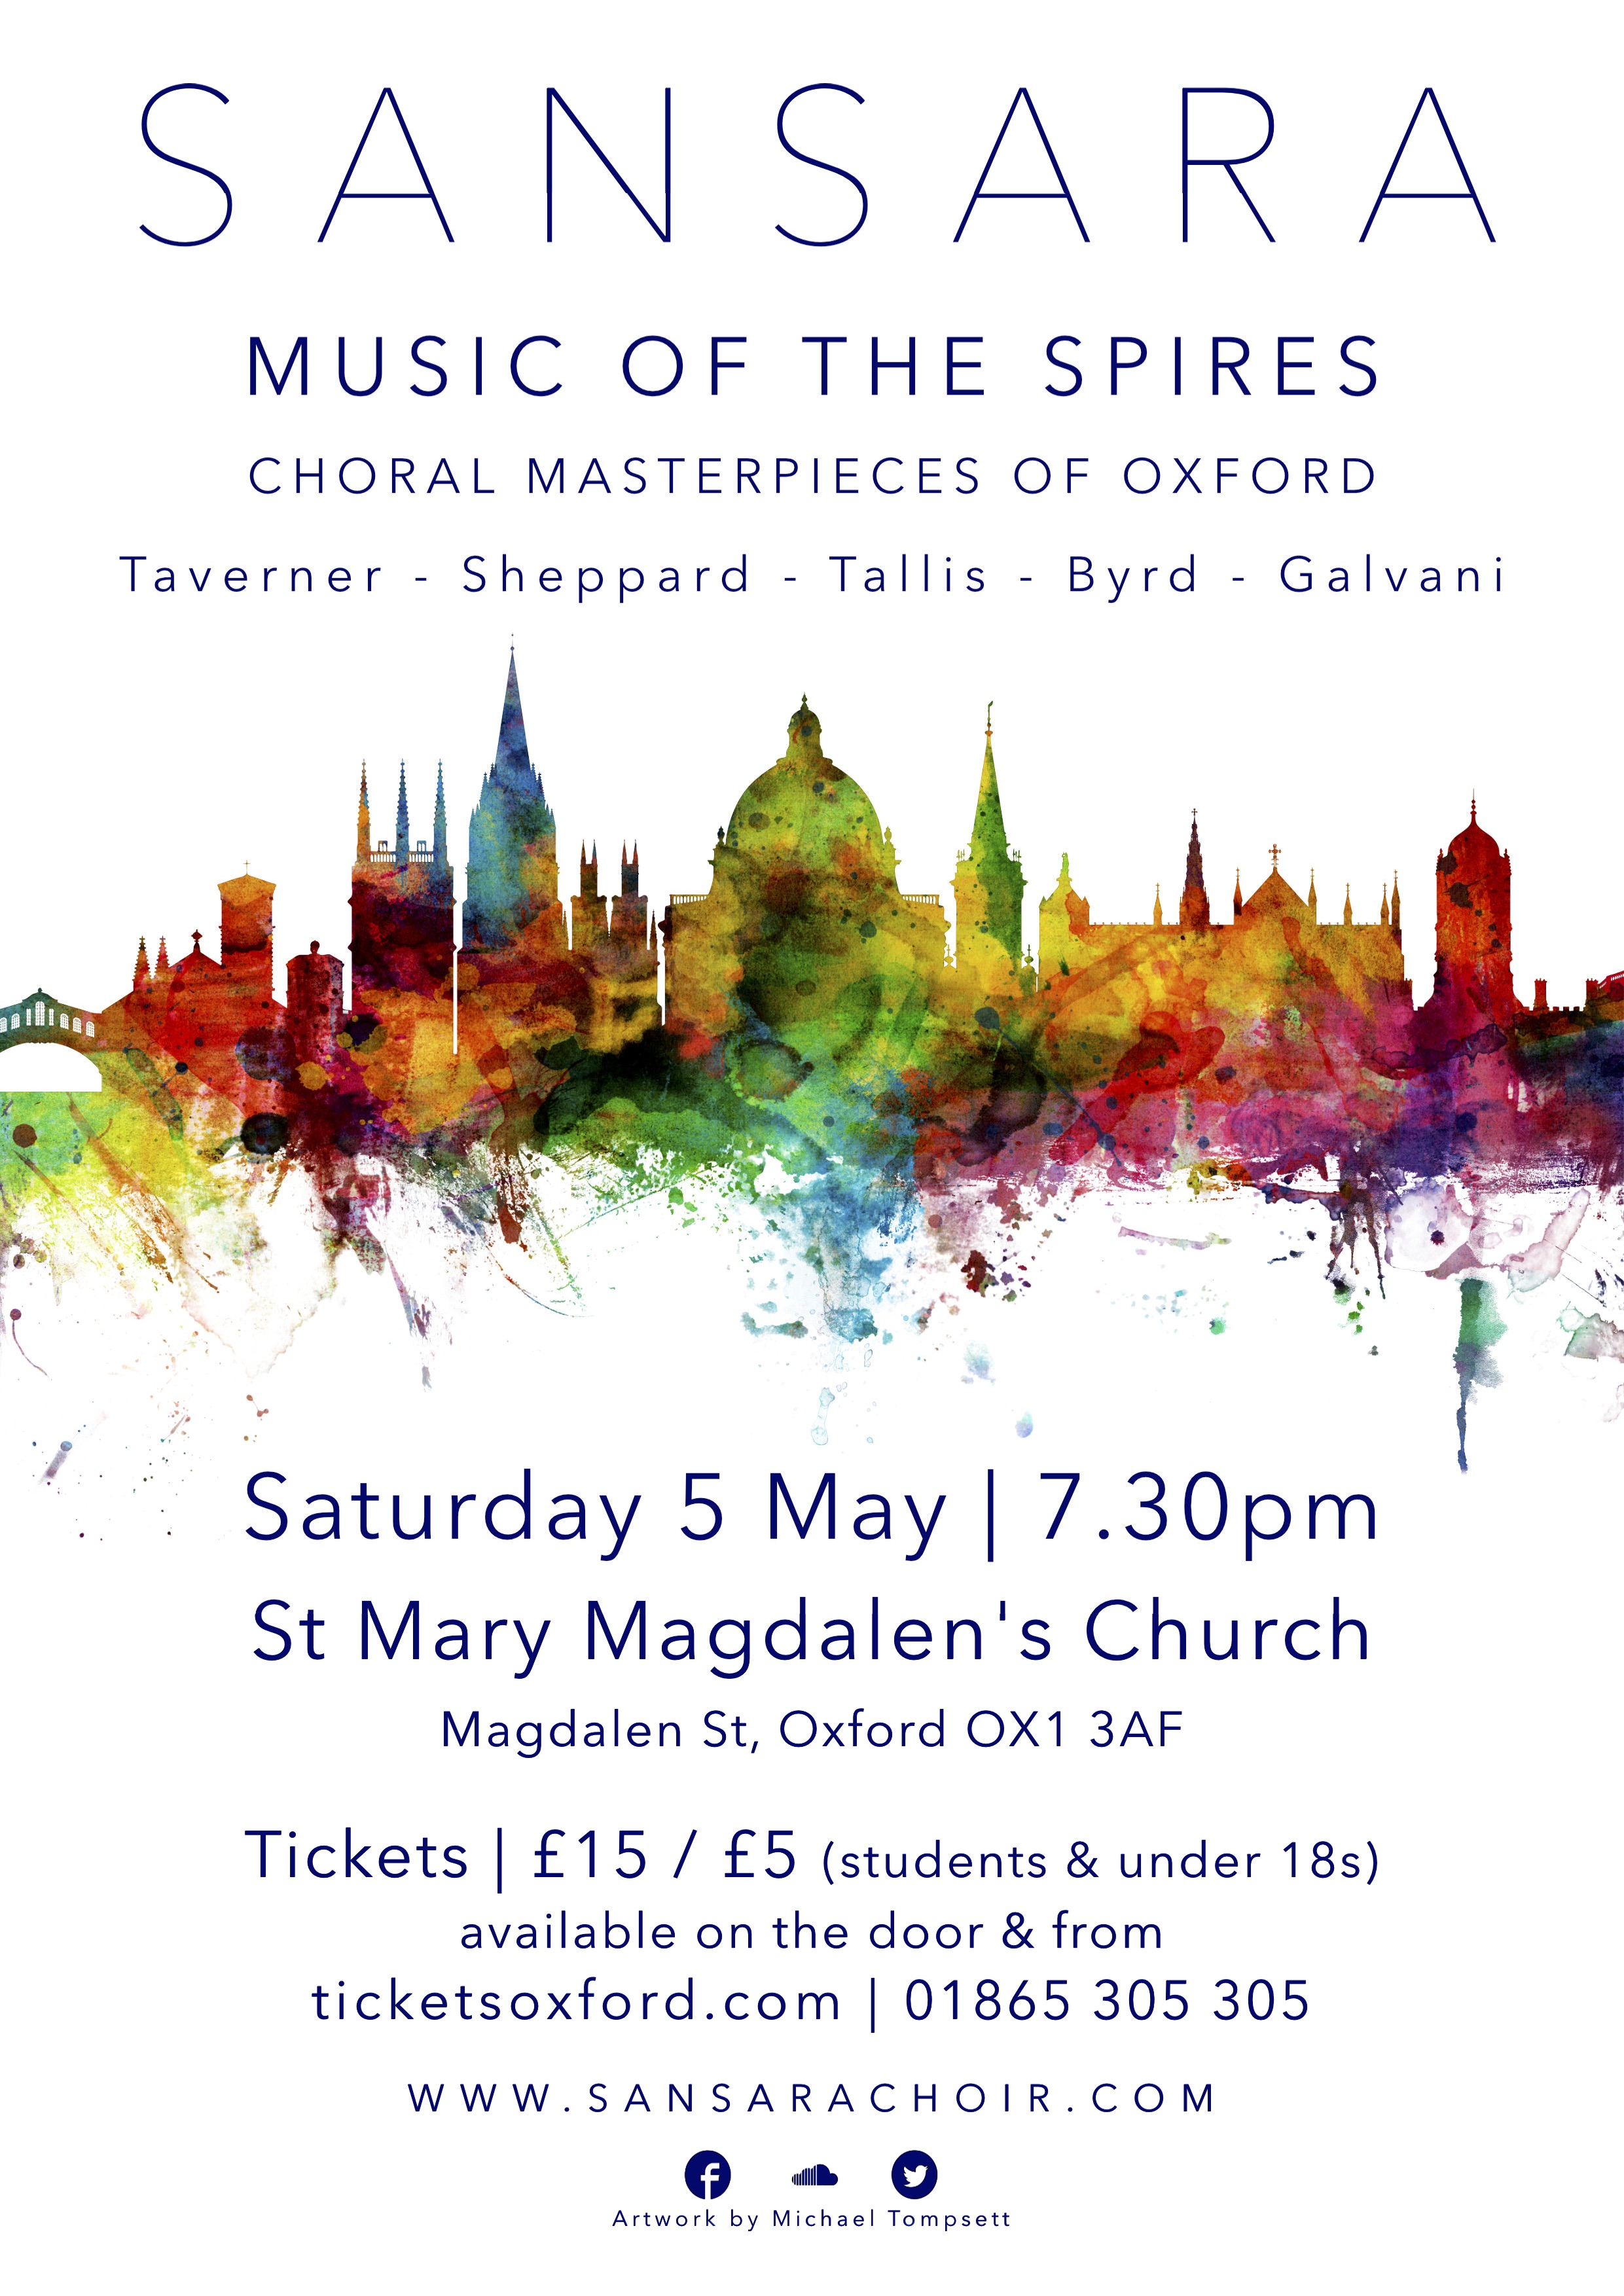 Music of the Spires Poster - Mags.jpg